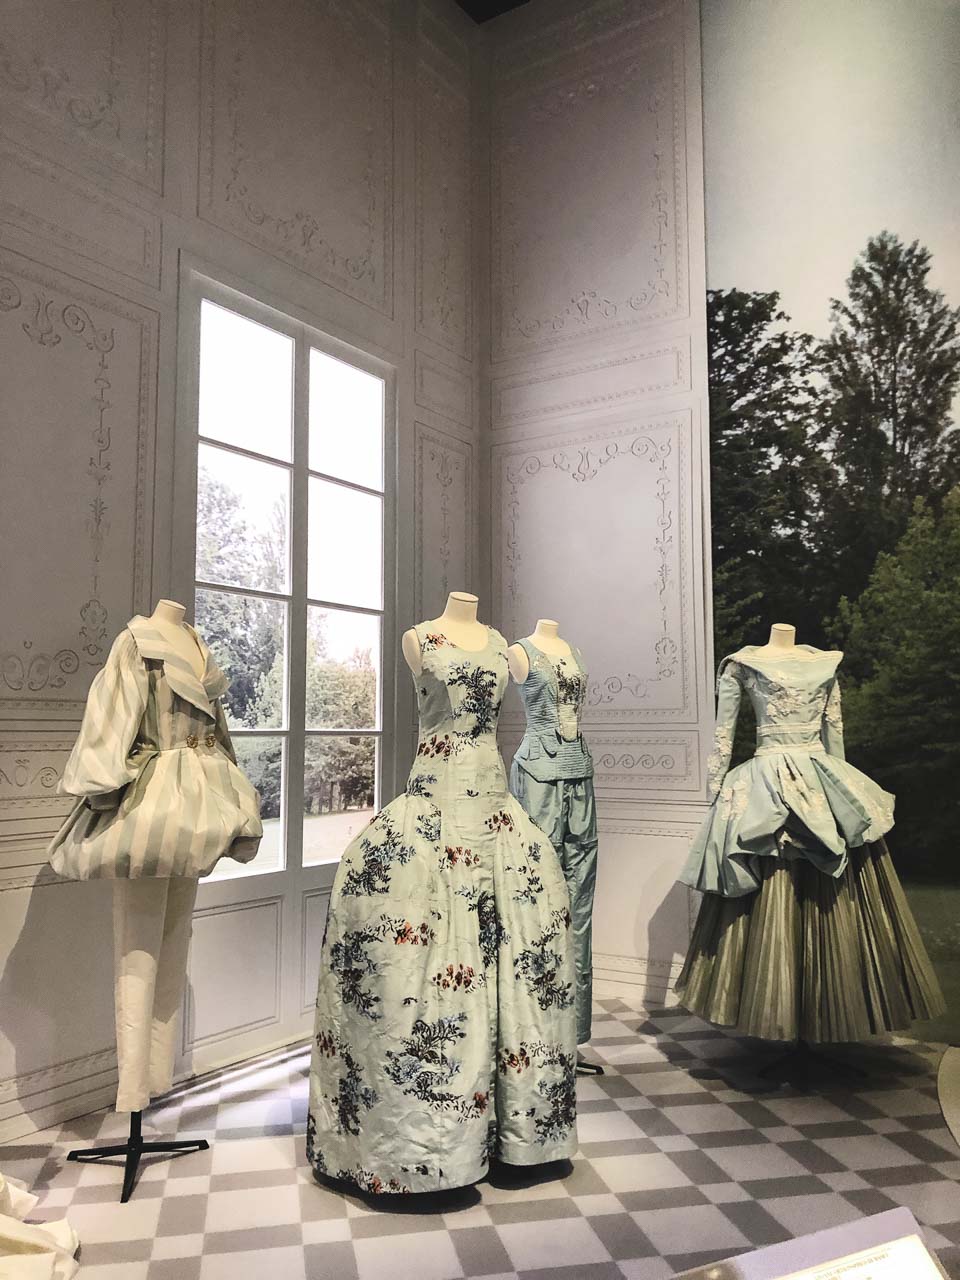 Dior creations in the Historicism section of the Christian Dior: Designer of Dreams exhibition at the Victoria and Albert Museum in London